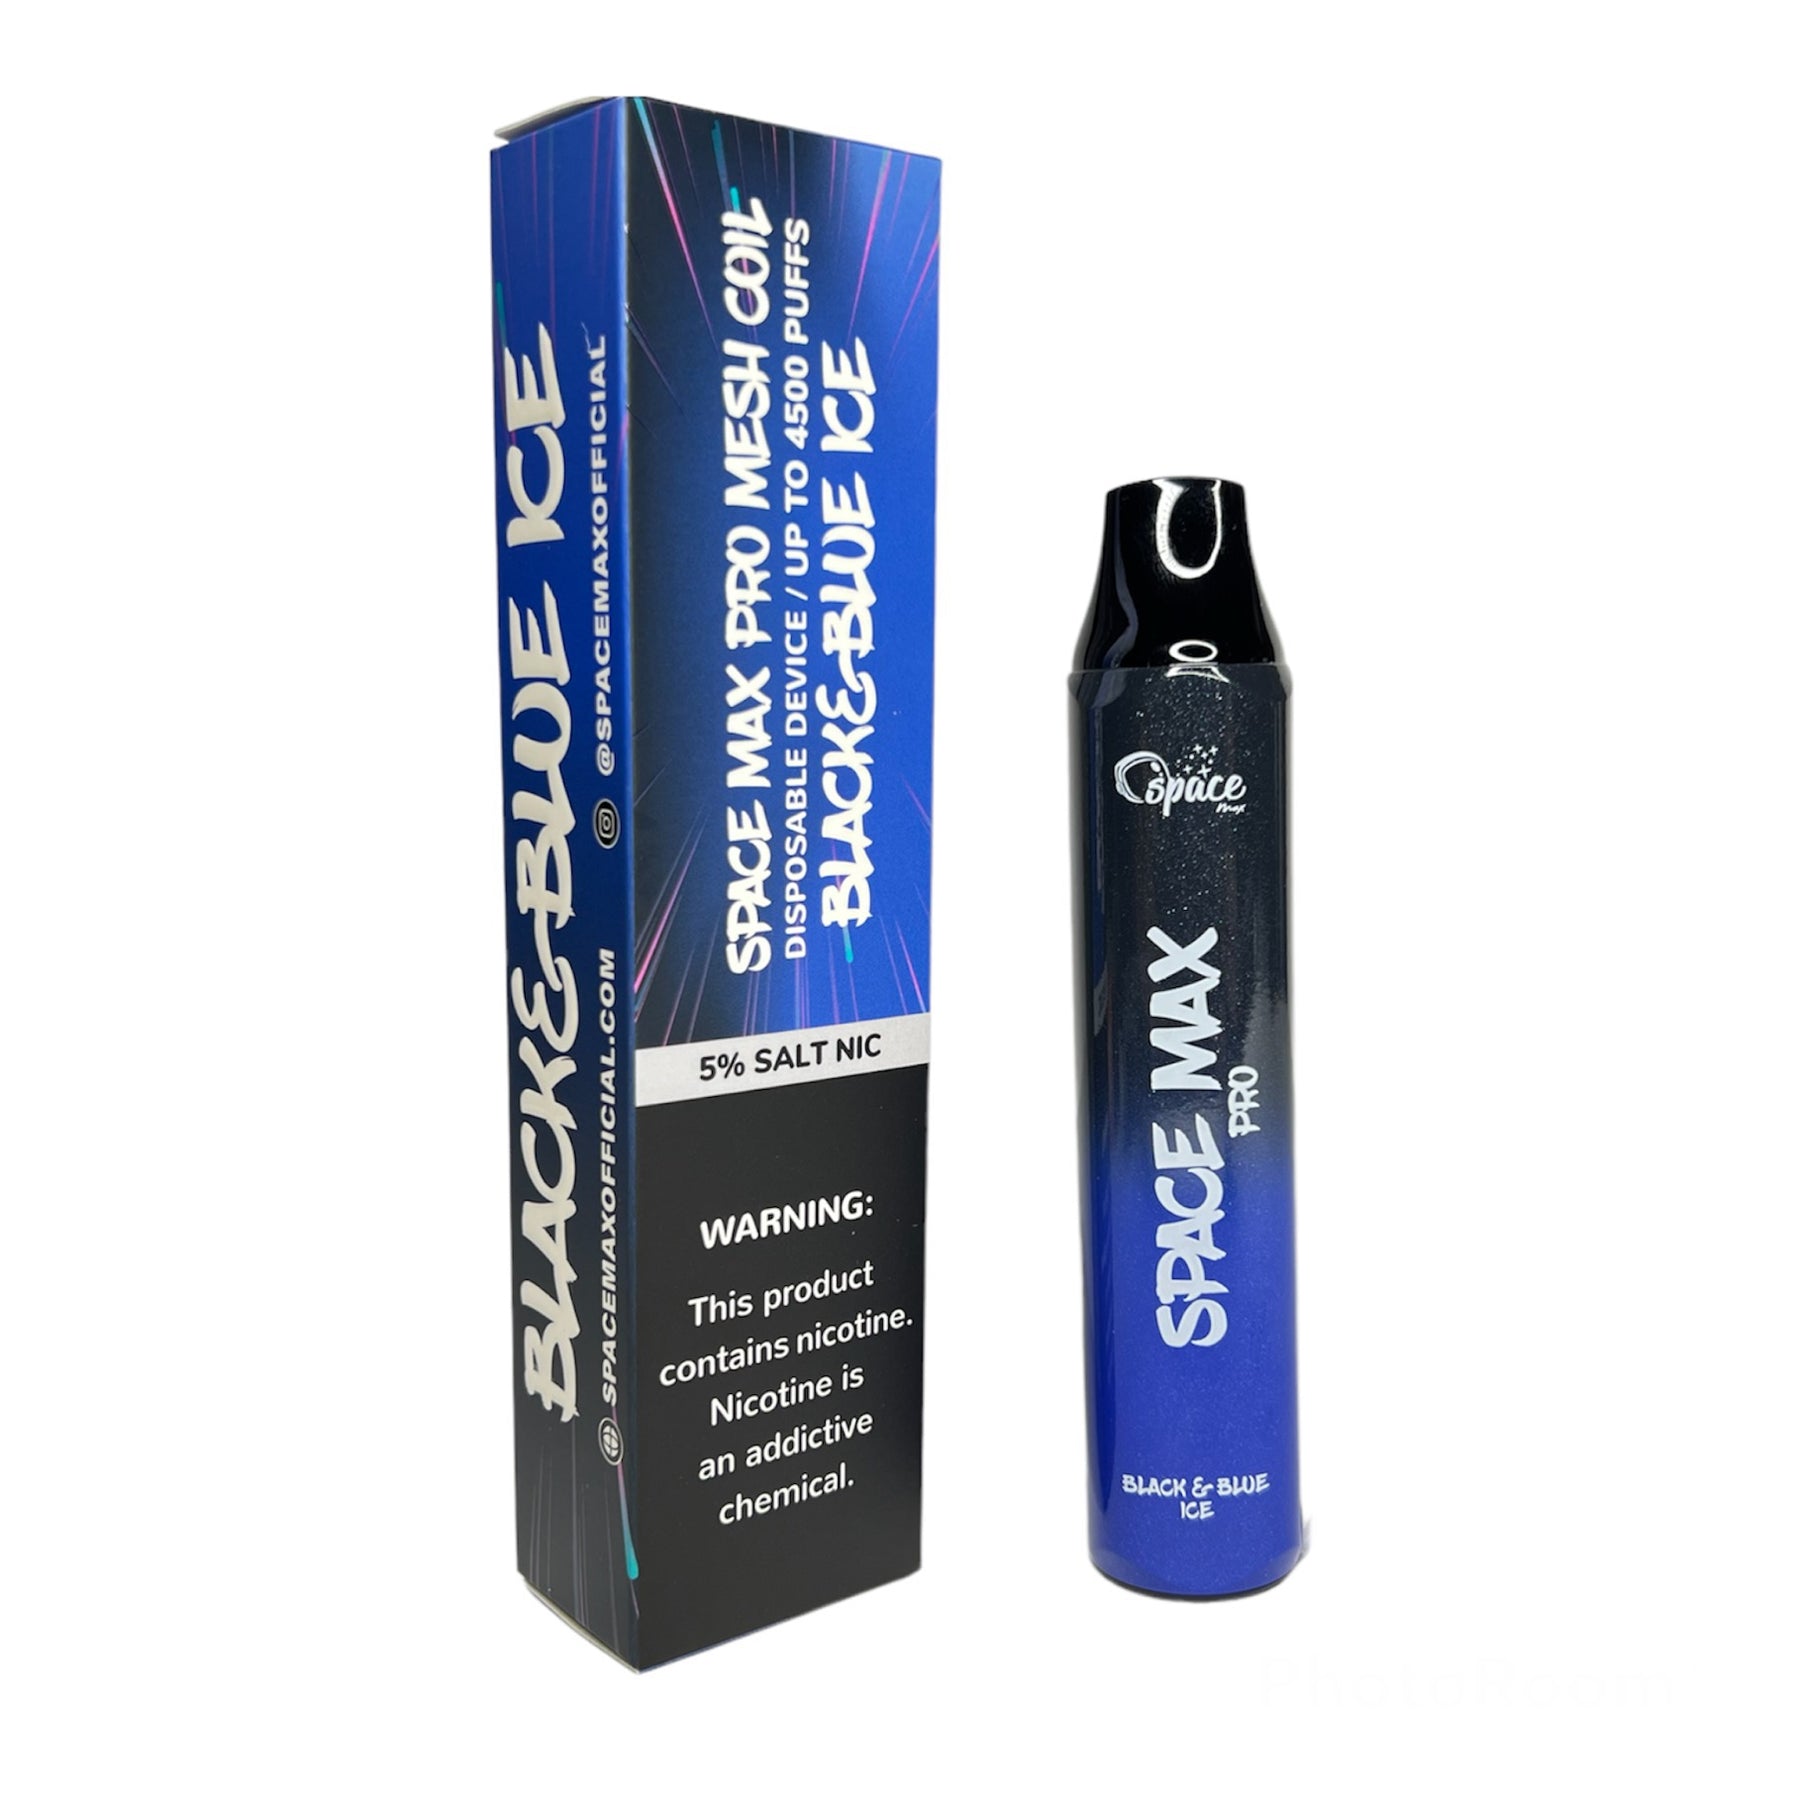 Space Max Pro Mesh Coil 4500 Puffs Disposable Vape Black and Blue Ice Flavor